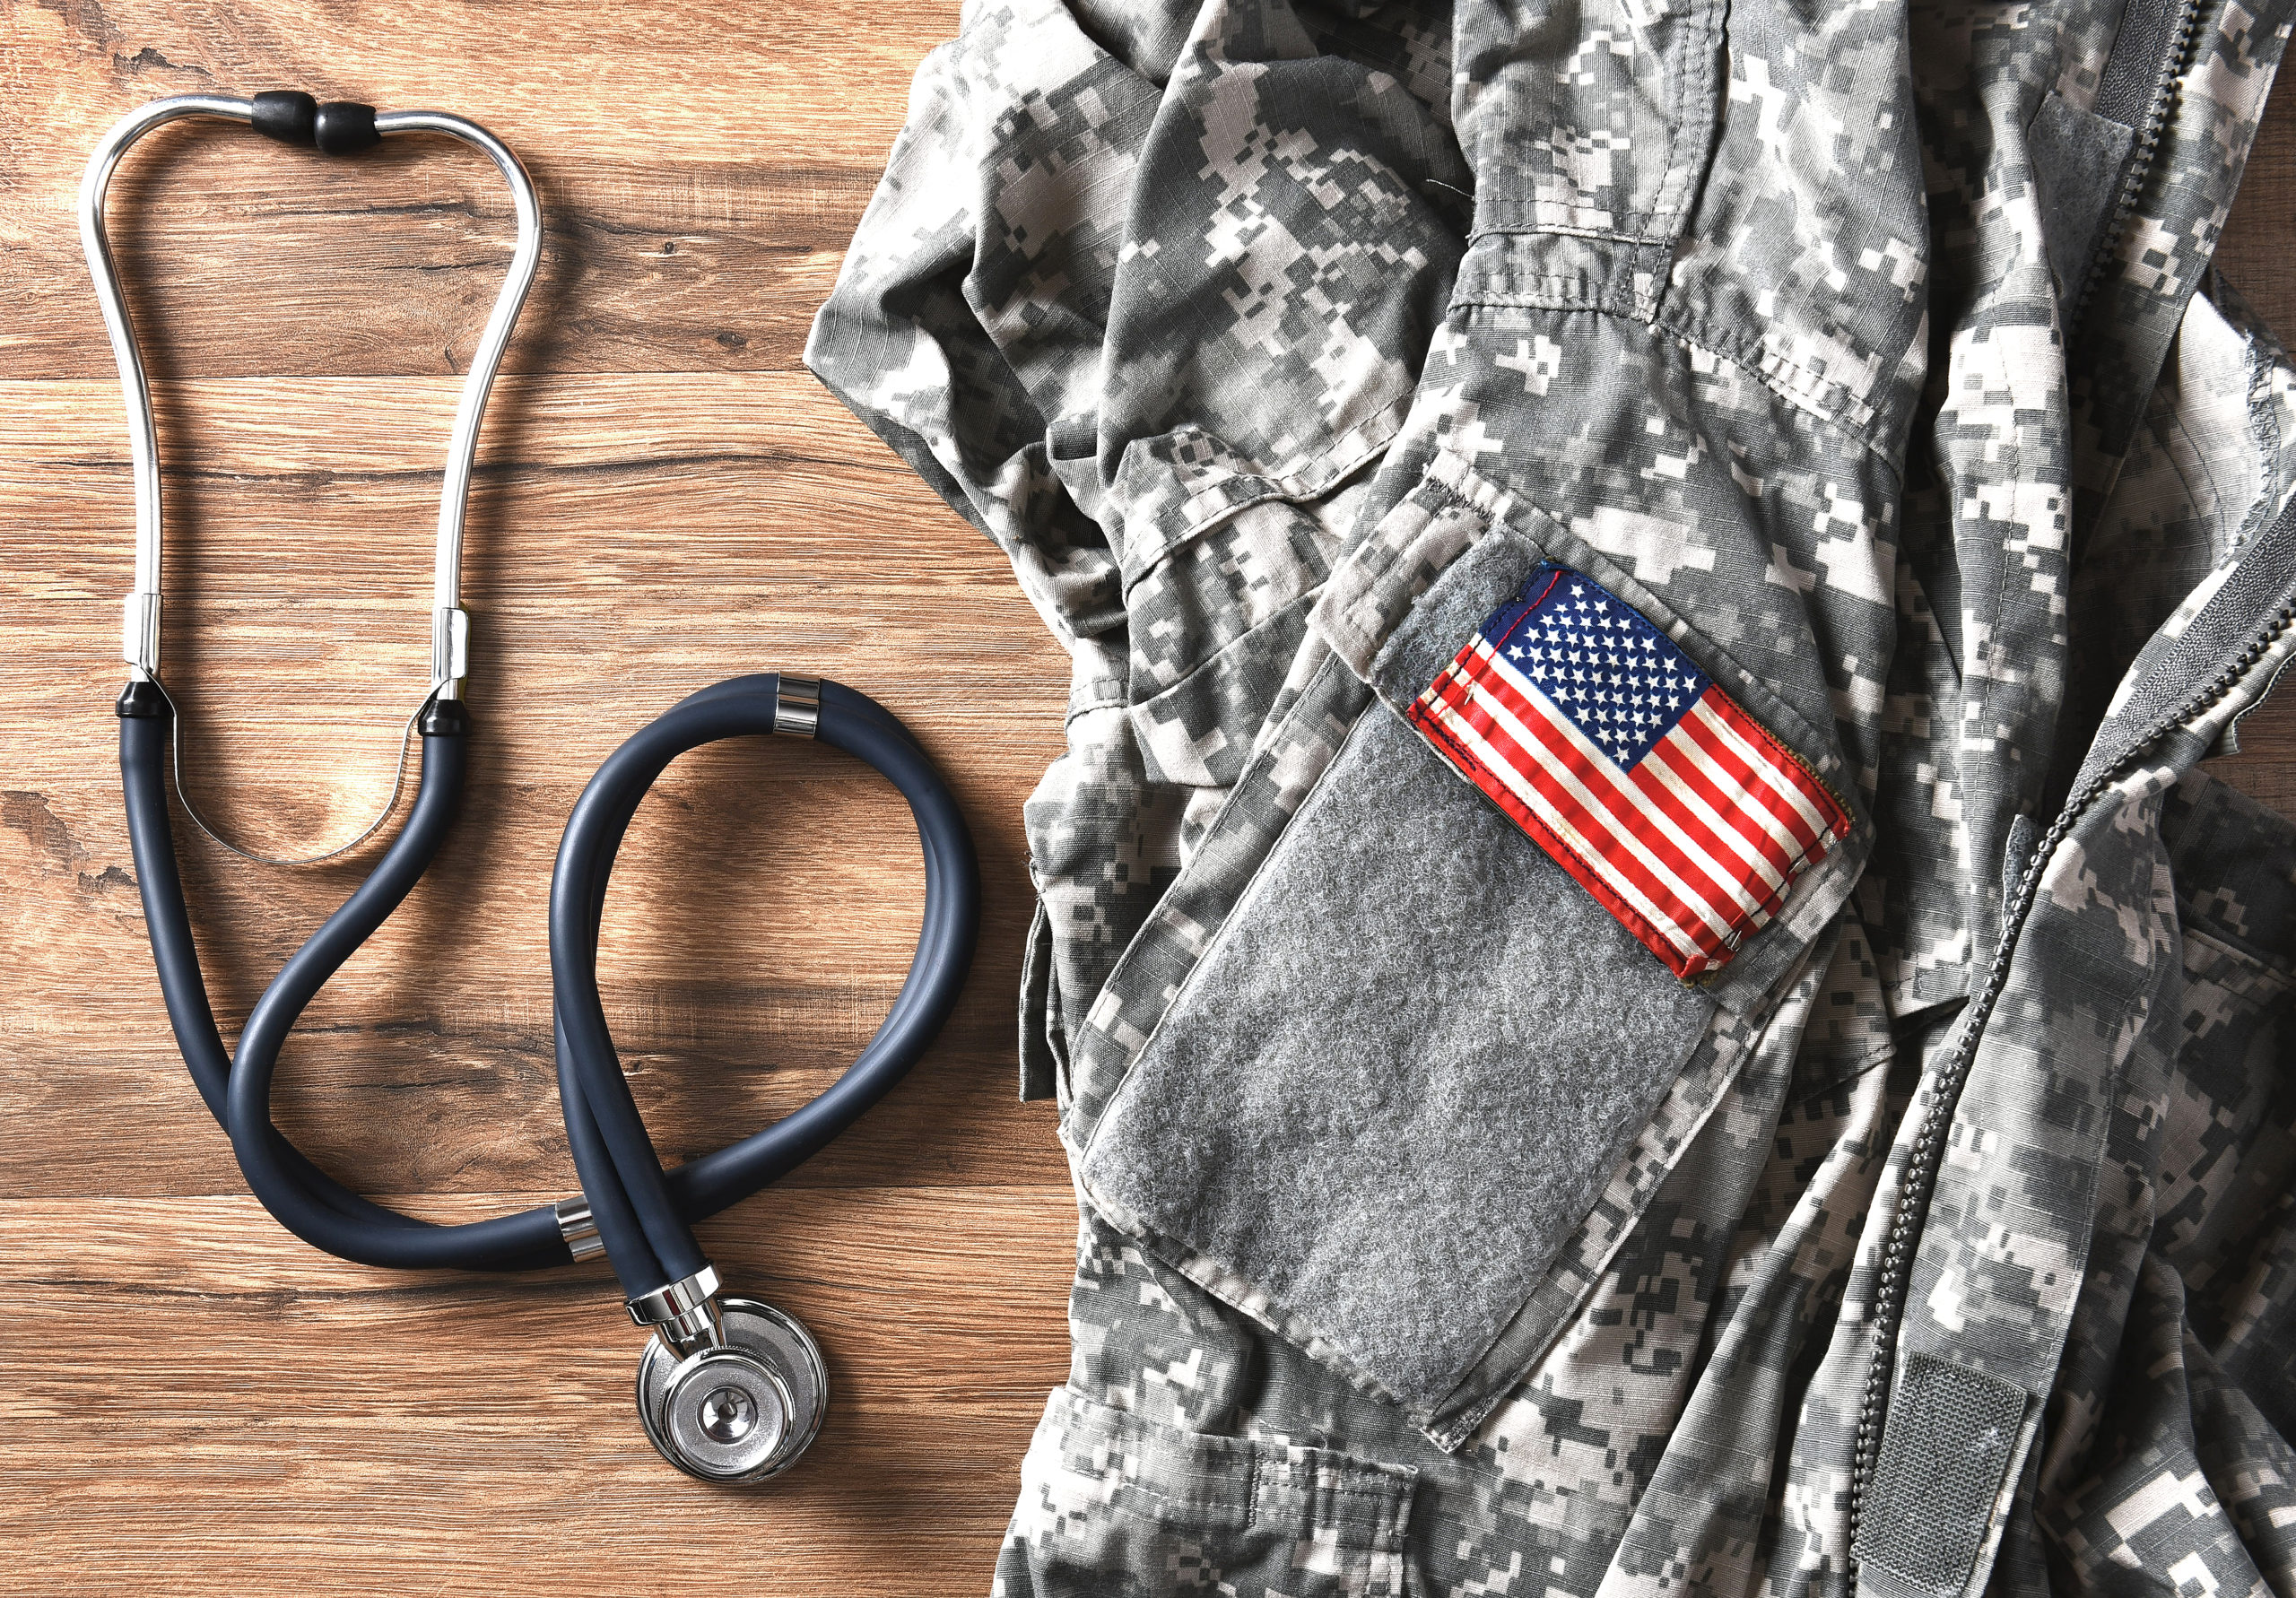 Military fatigues and stethoscope on a table.